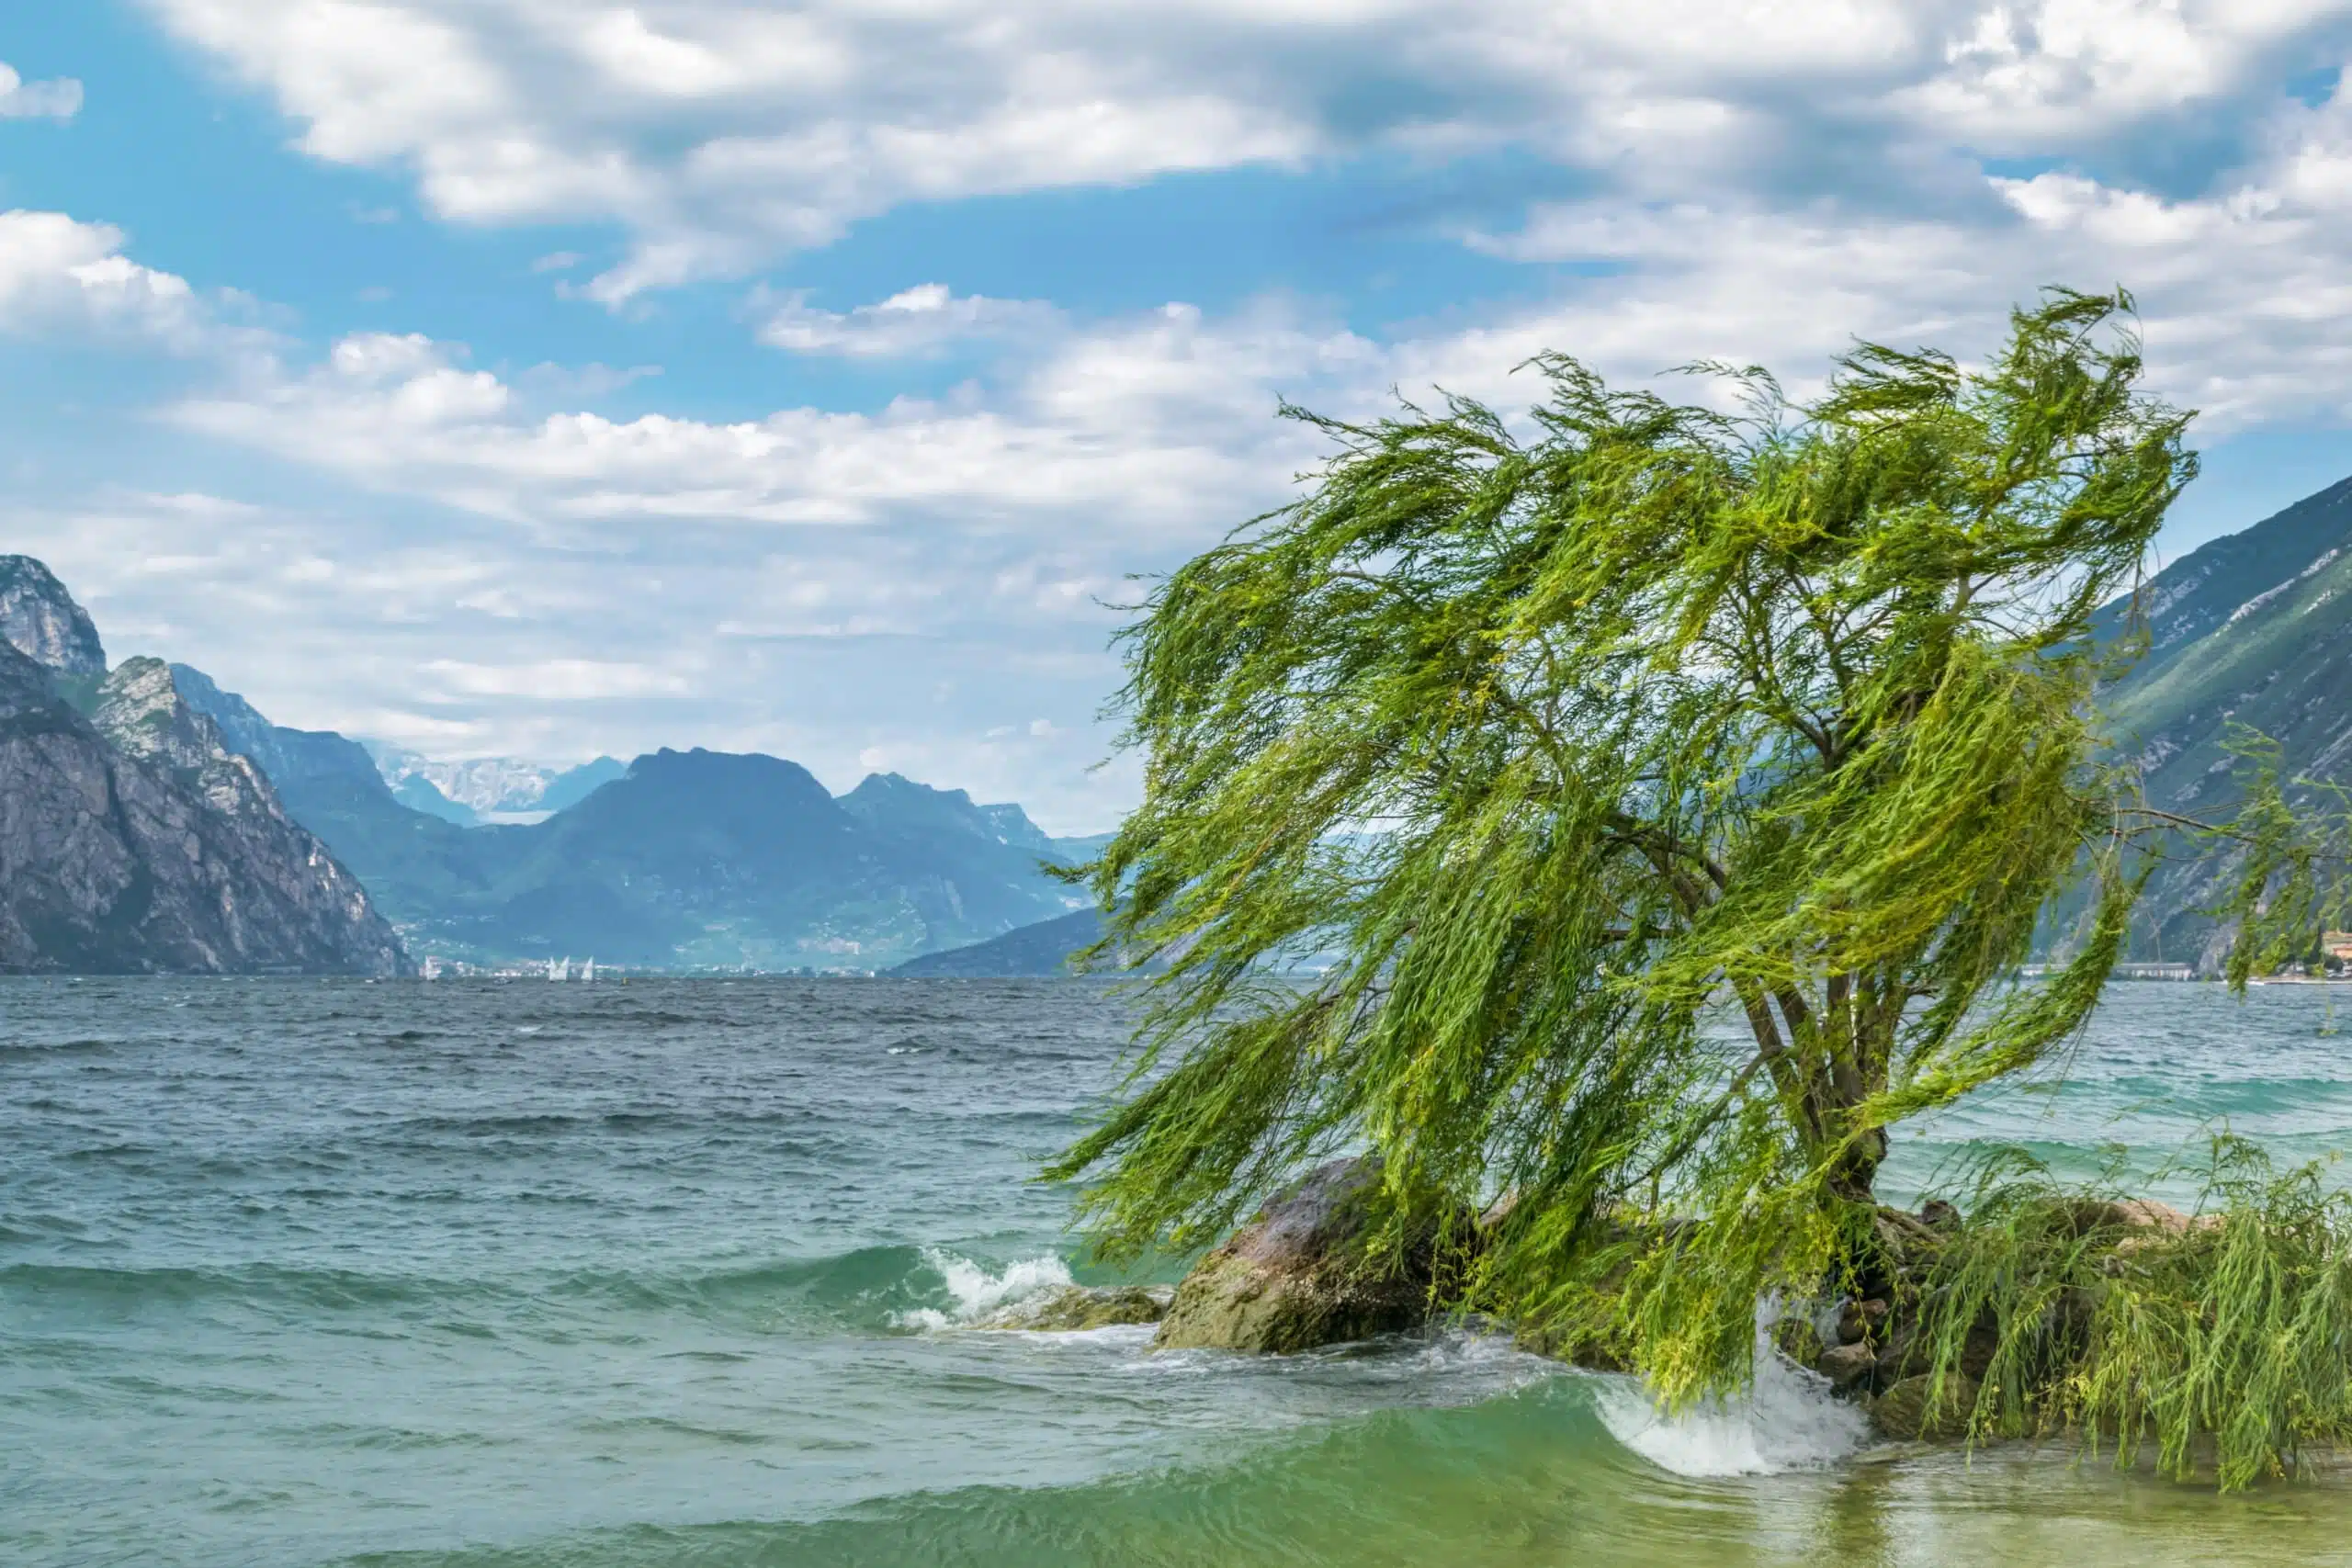 Lone willow tree by the lake, branches swaying blown by the wind.